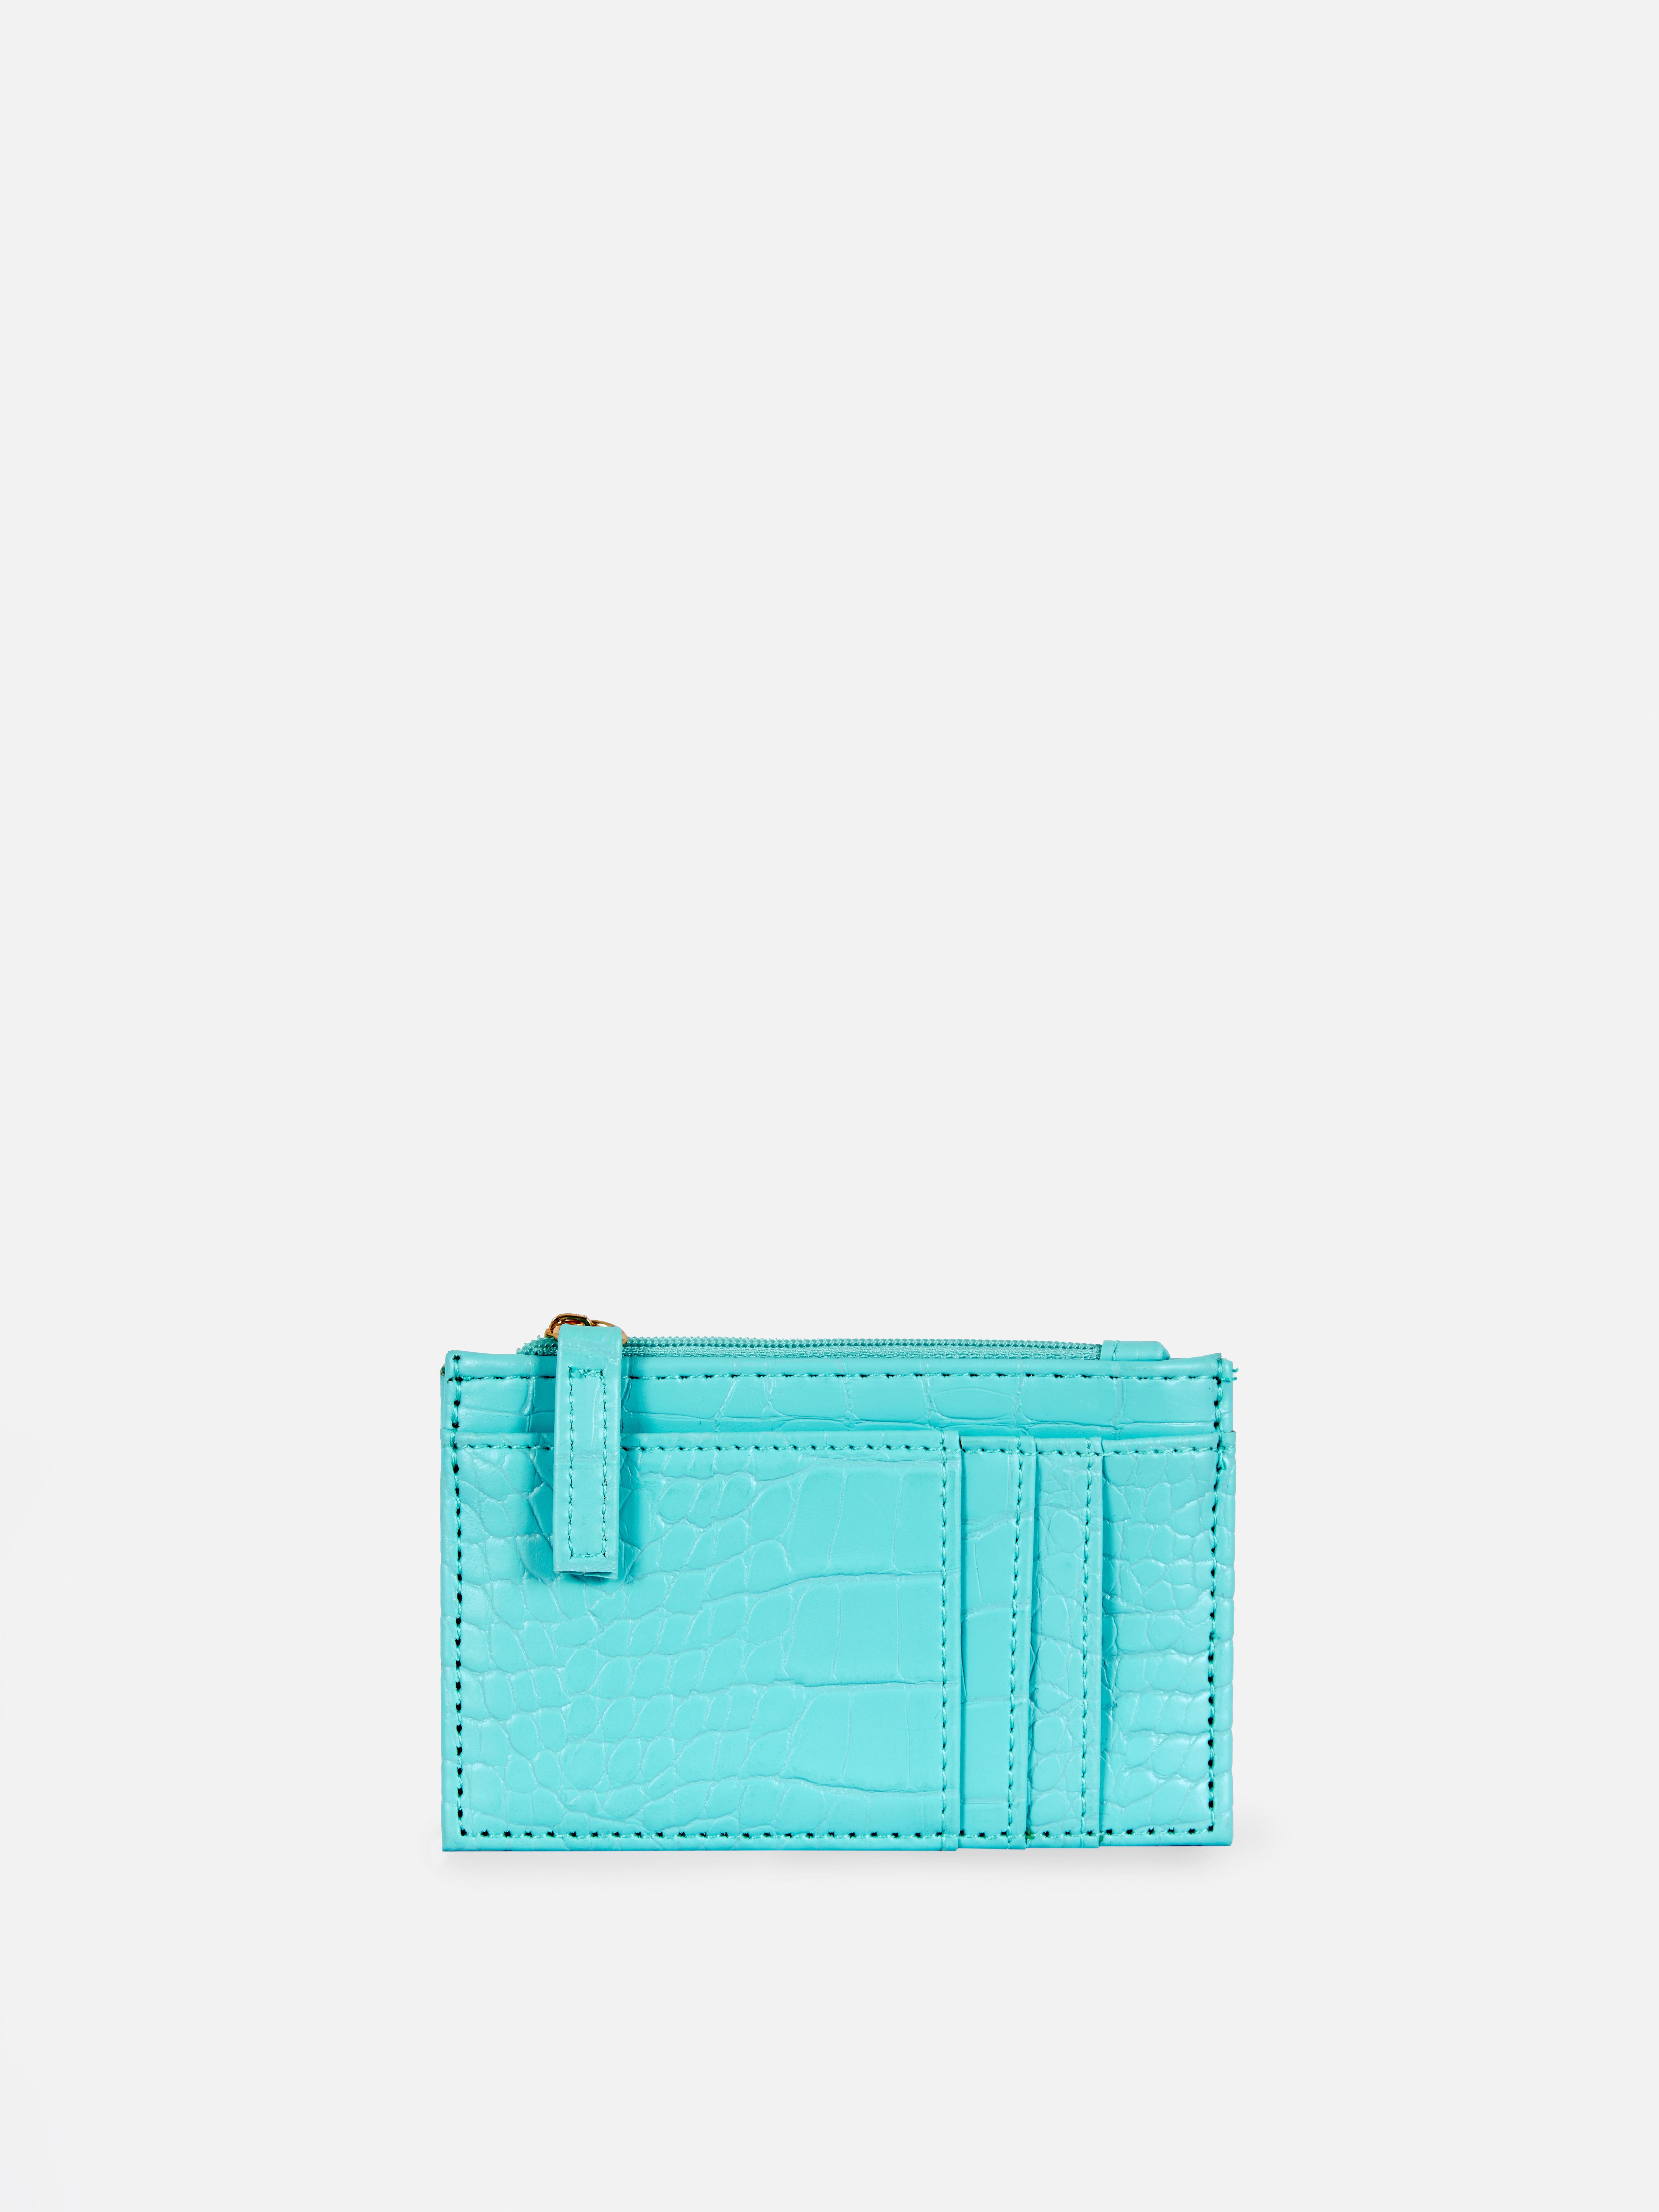 Croc Faux Leather Card Holder